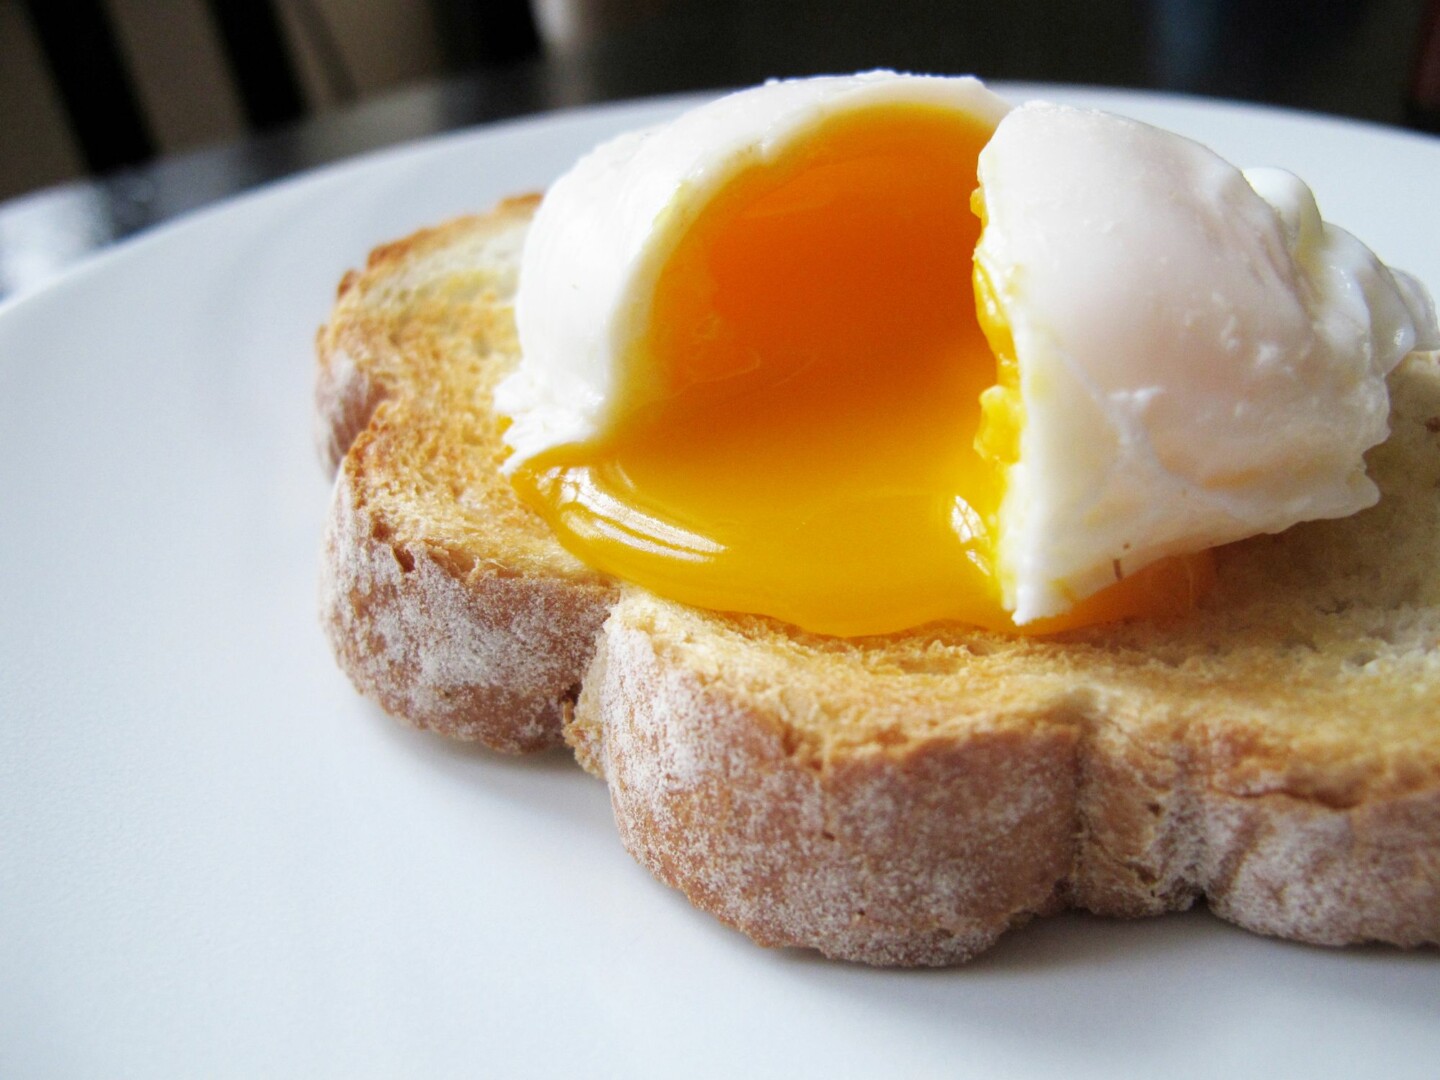 poached egg 1597080388 8596 1635780073